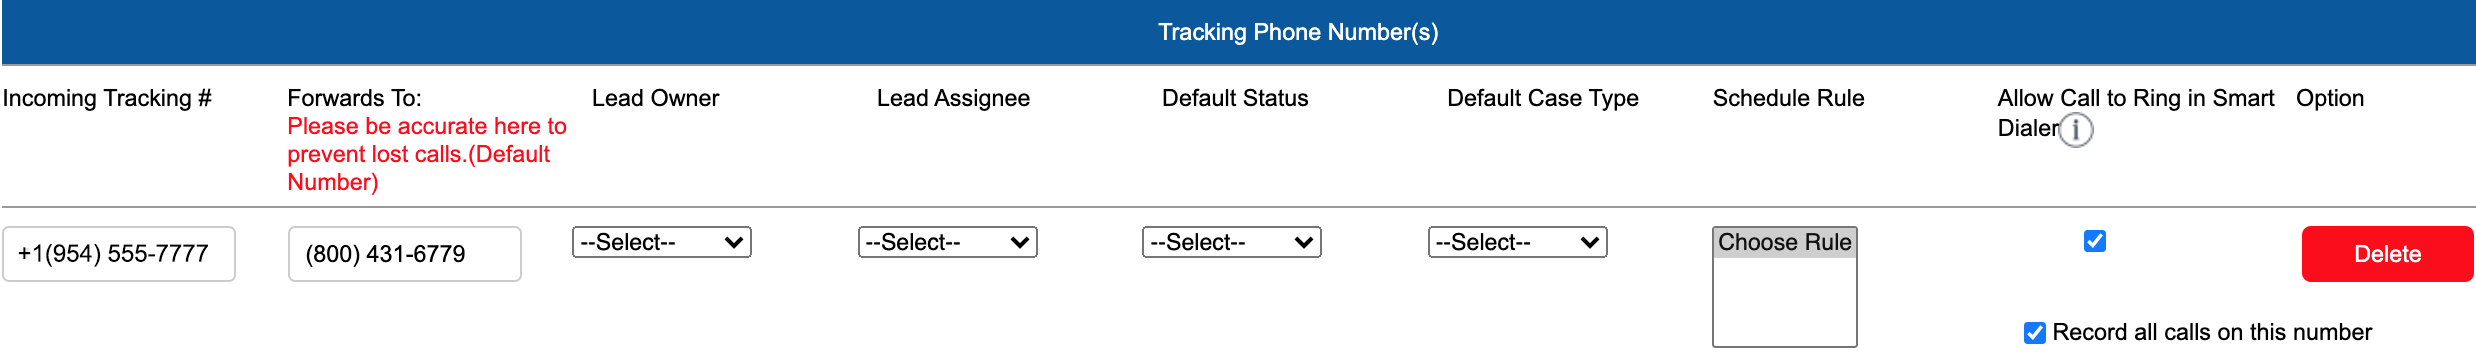 configuring_new_tracking_number.png